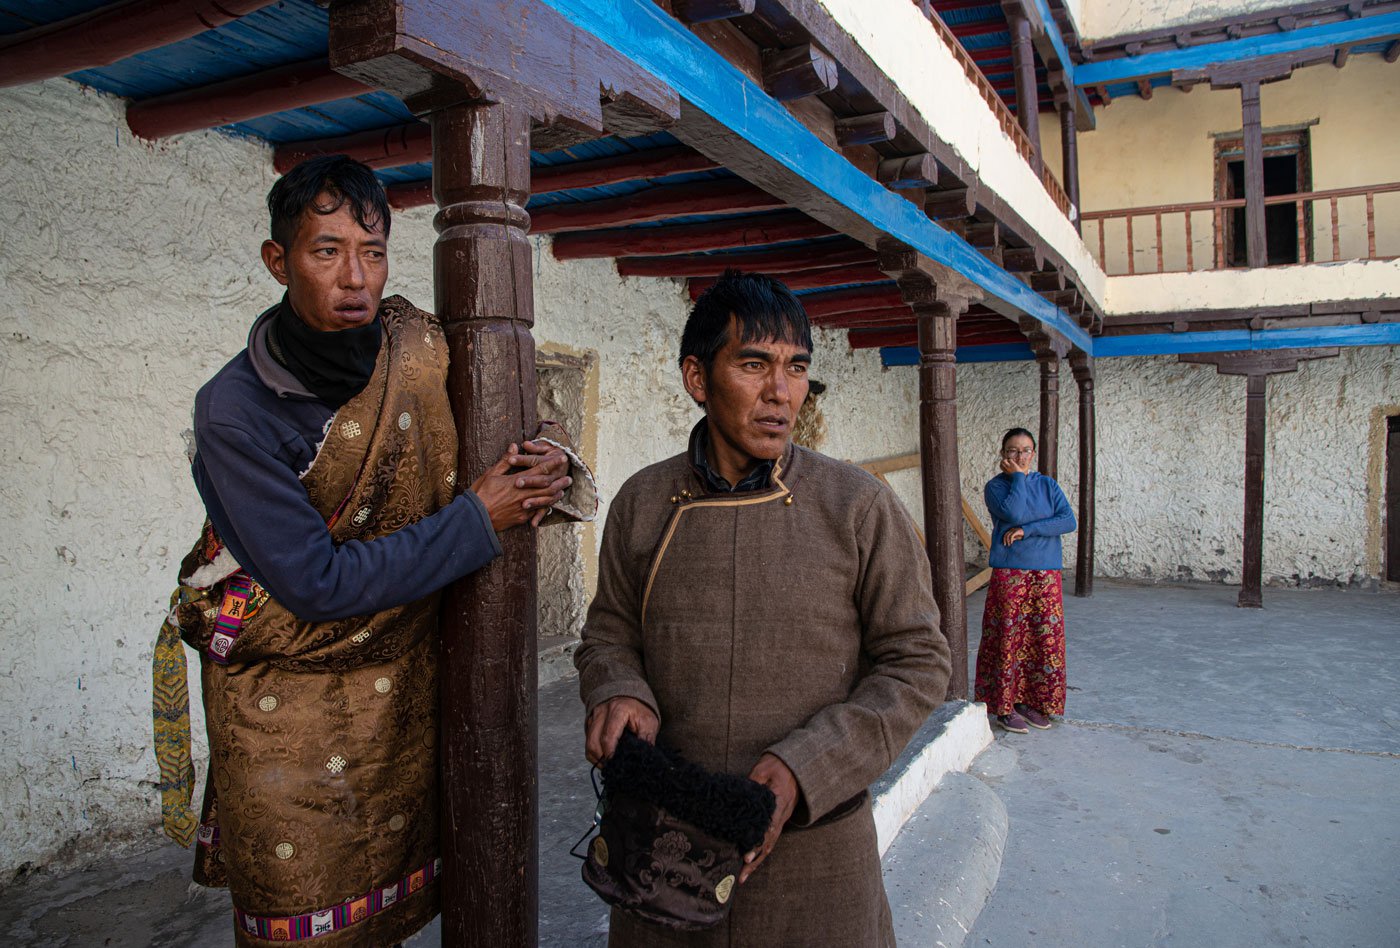 Inside the monastery, villagers Rangol (left) and Kesang Angel (right) observe the prayers and ceremony